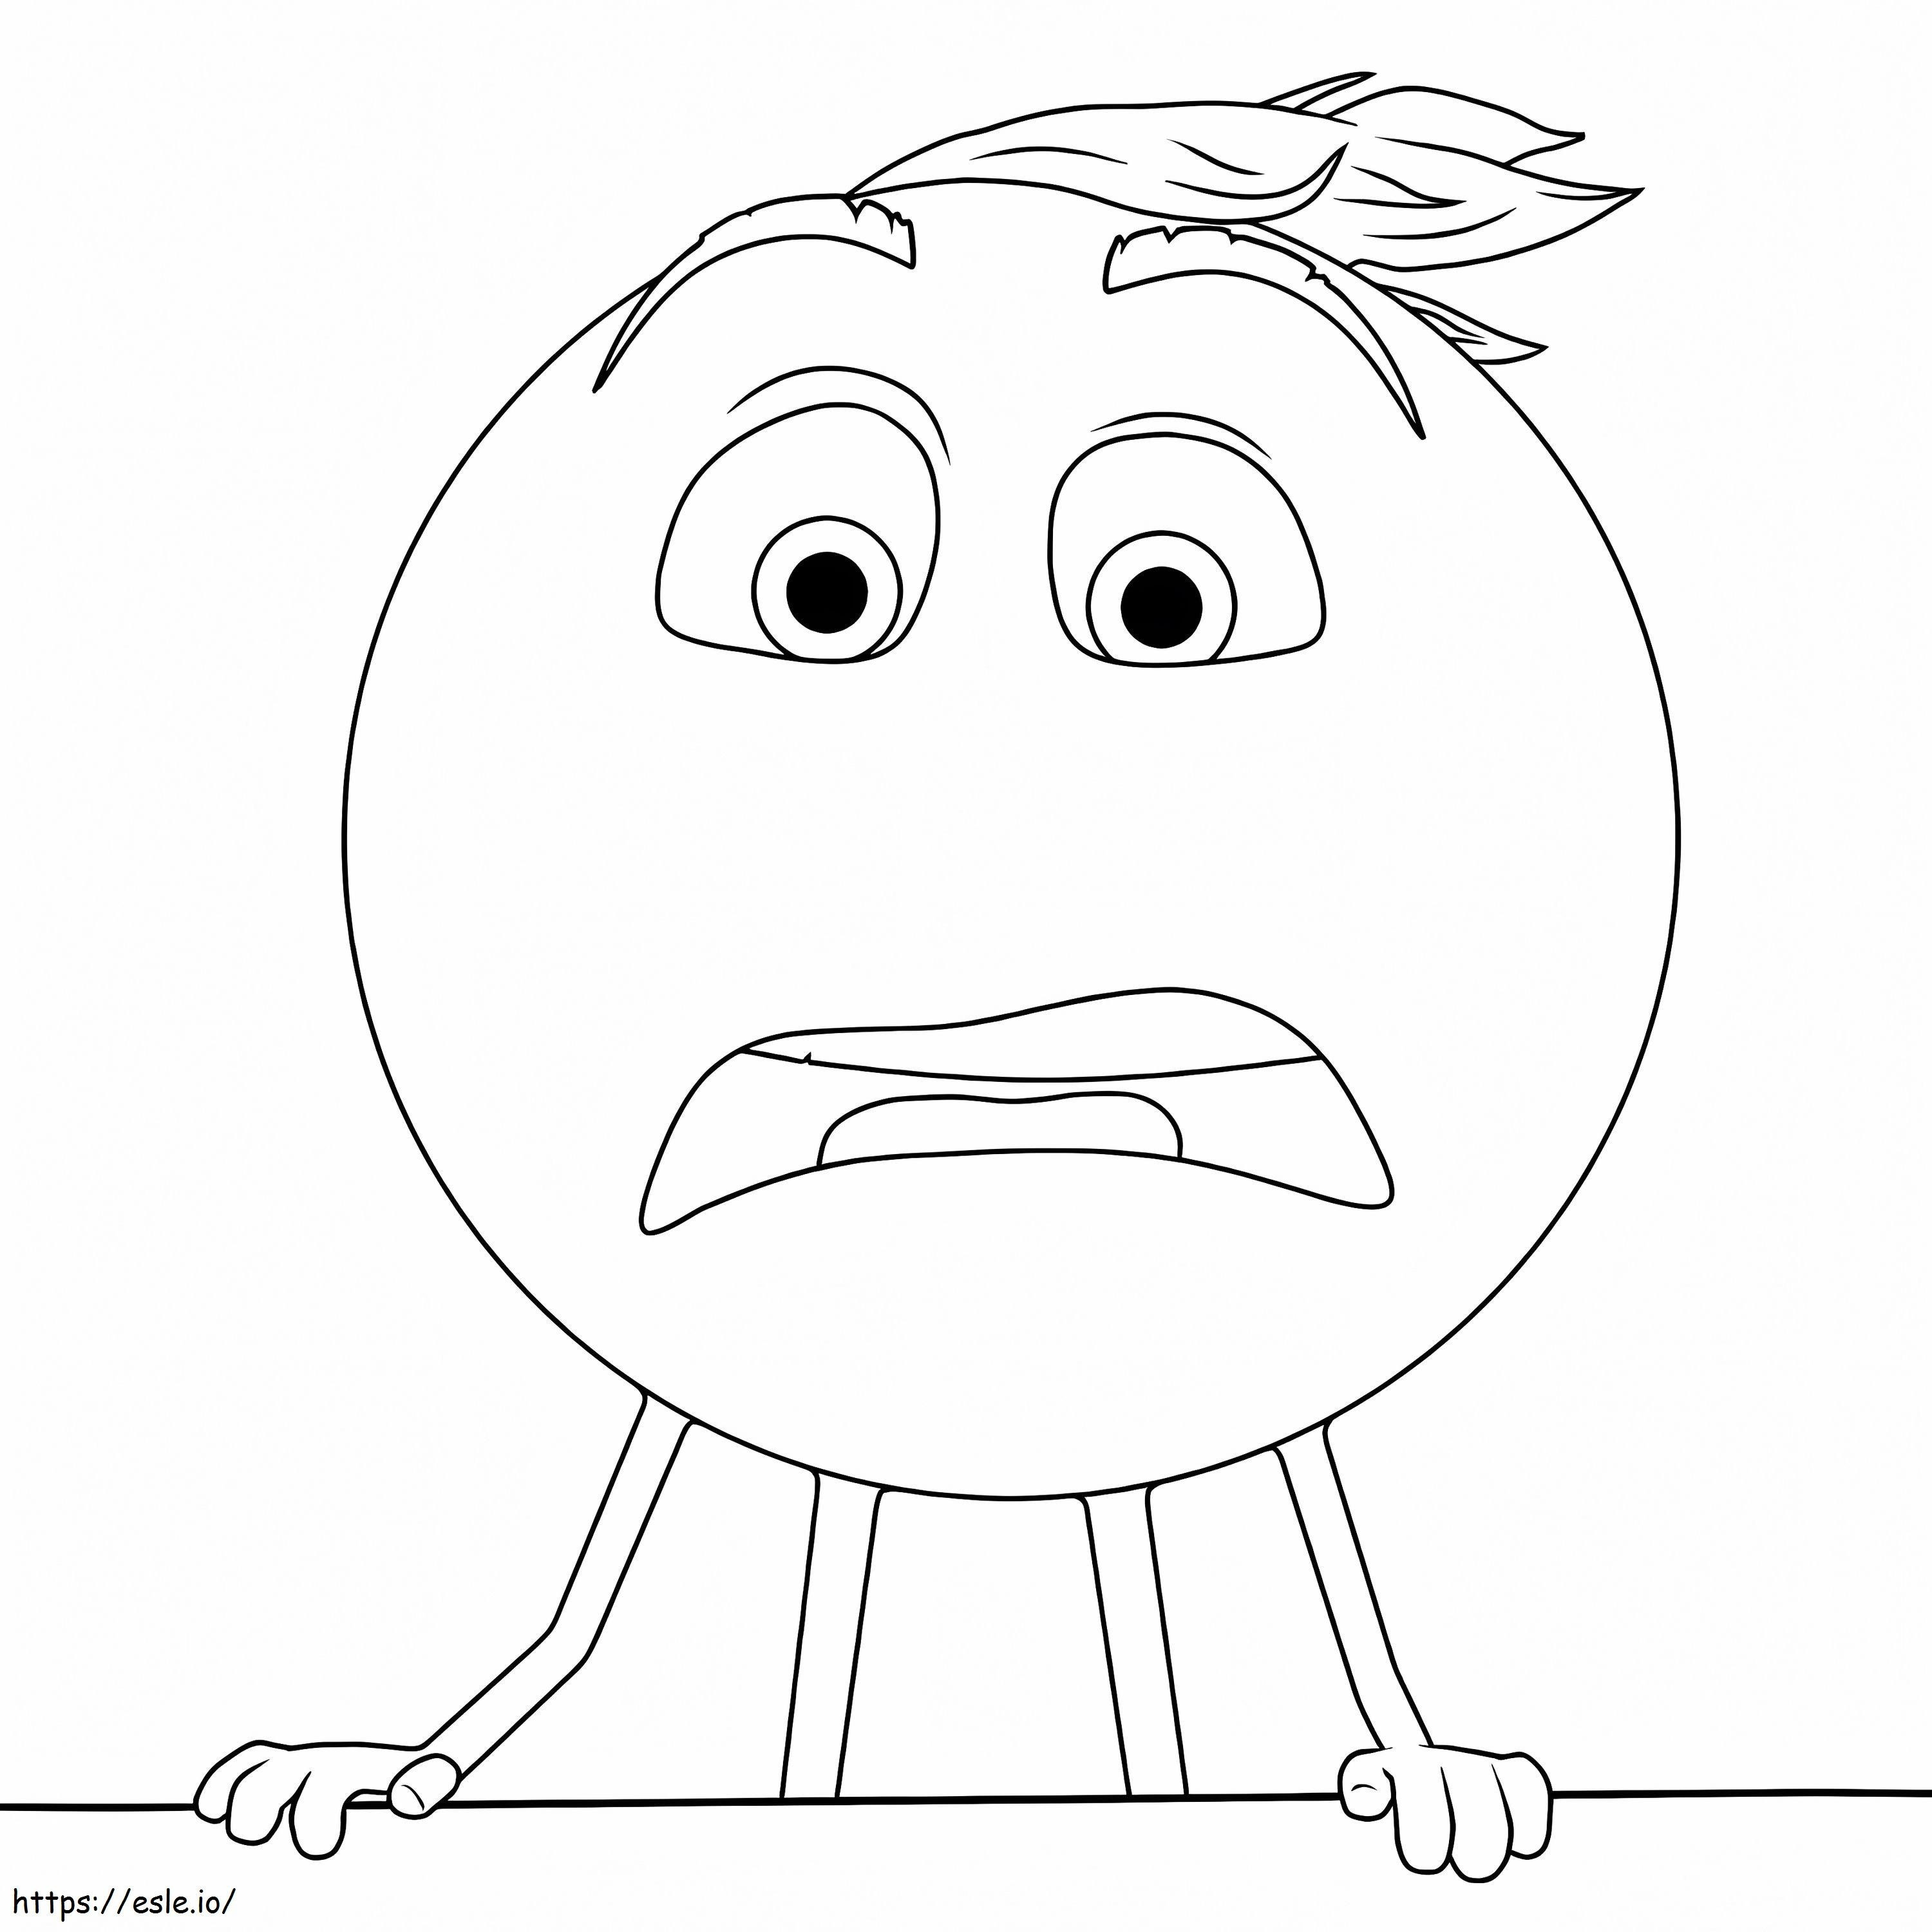 Gene Confused coloring page